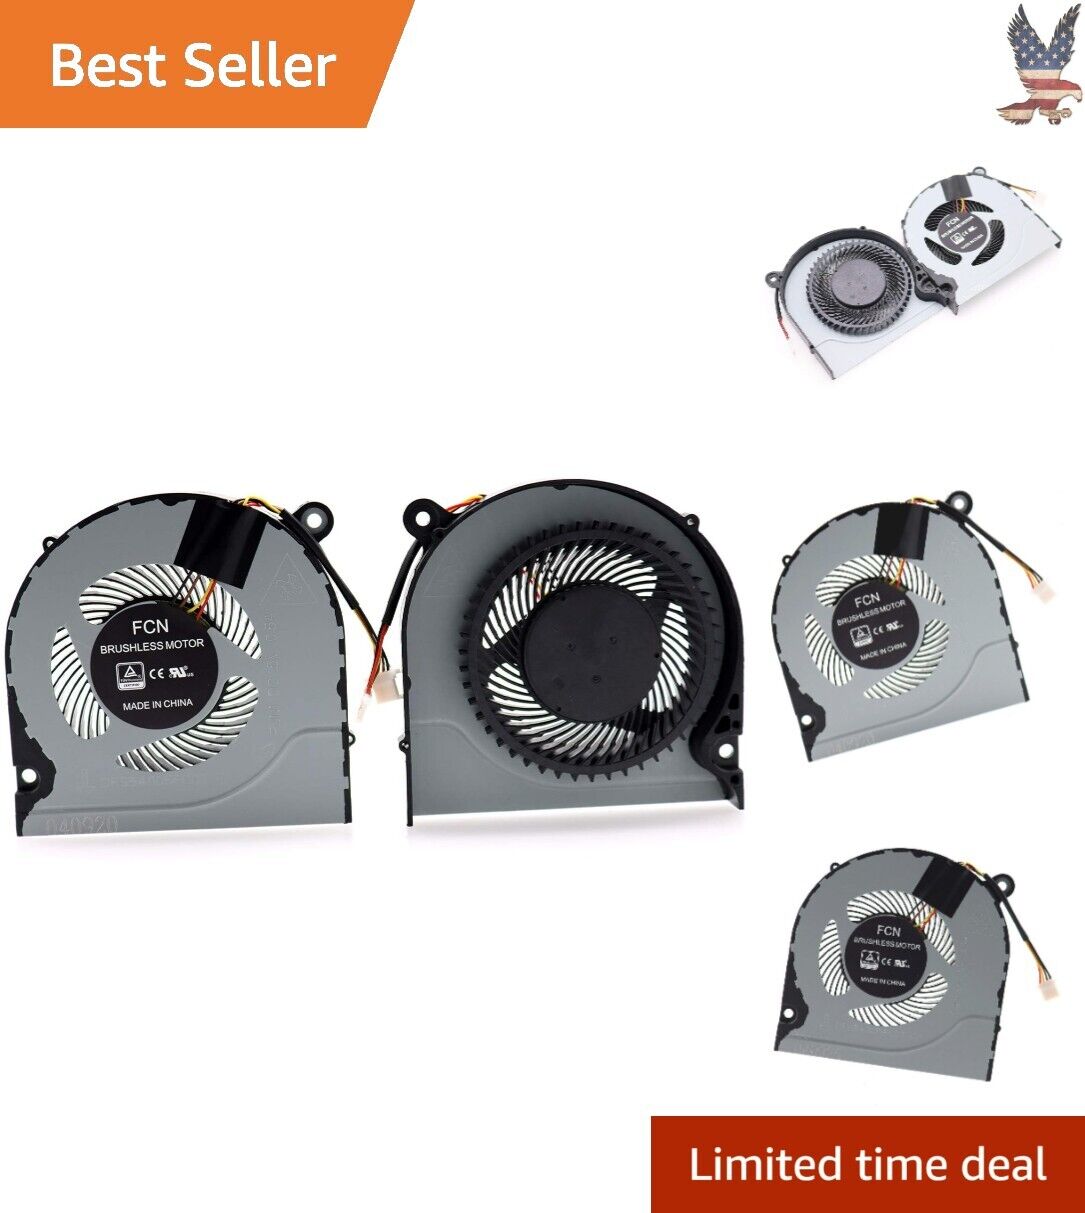 CPU GPU Cooling Fan Replacement - 4-Pin 4-Wires Connector, 5V/0.5A, 3500 RPM